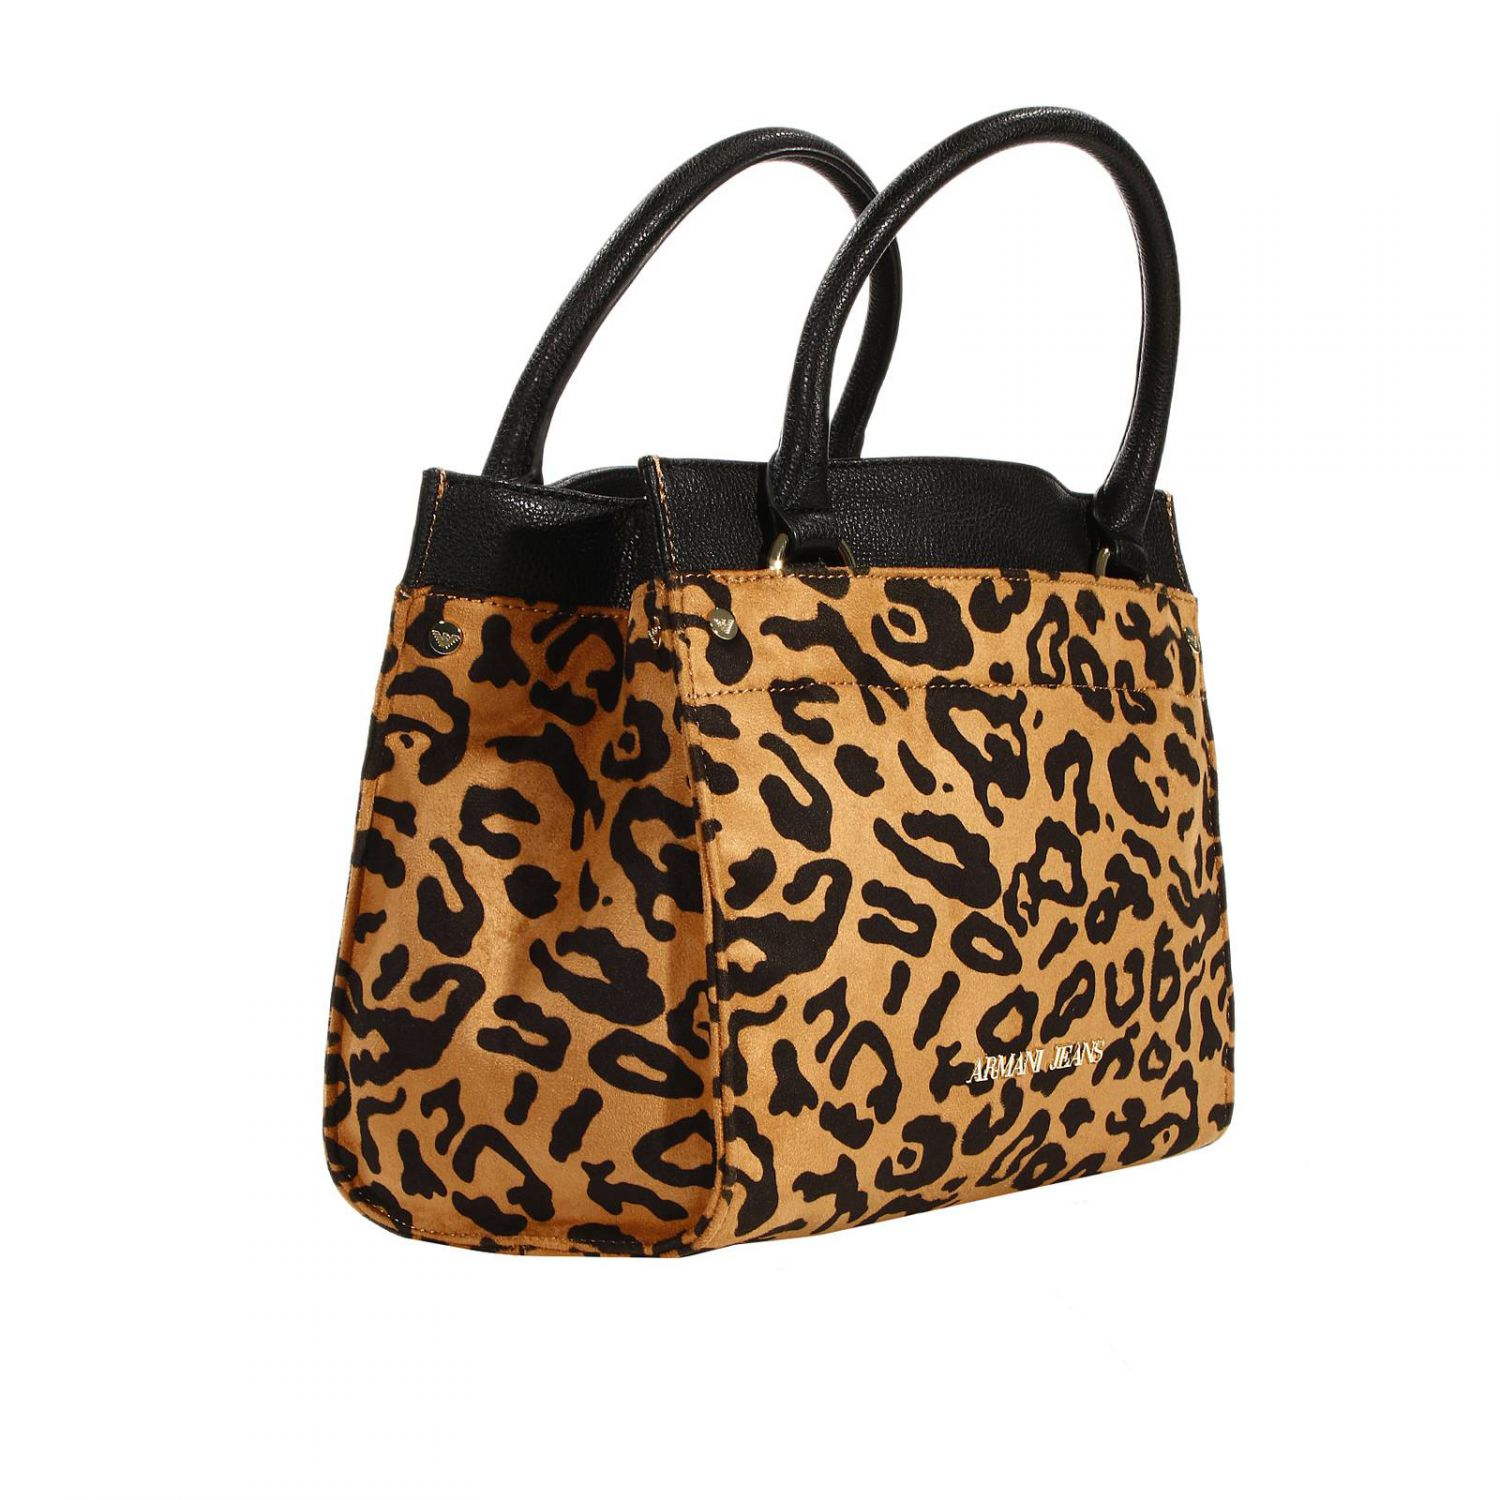 Armani jeans Handbag Ecoleather Leopard Print Small Shopping in Animal ...